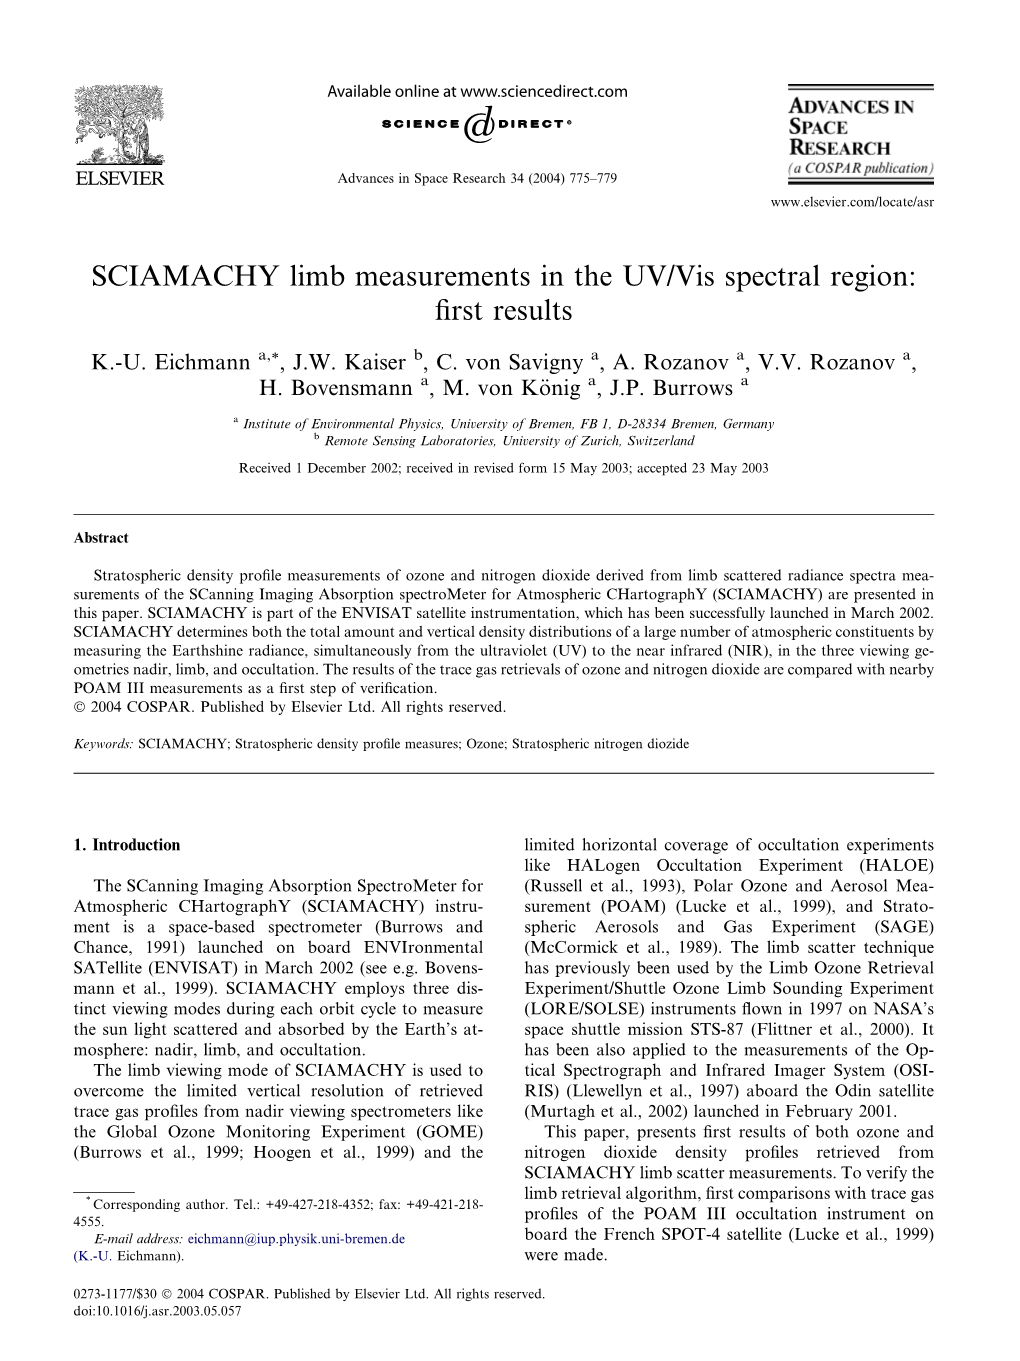 SCIAMACHY Limb Measurements in the UV/Vis Spectral Region: First Results